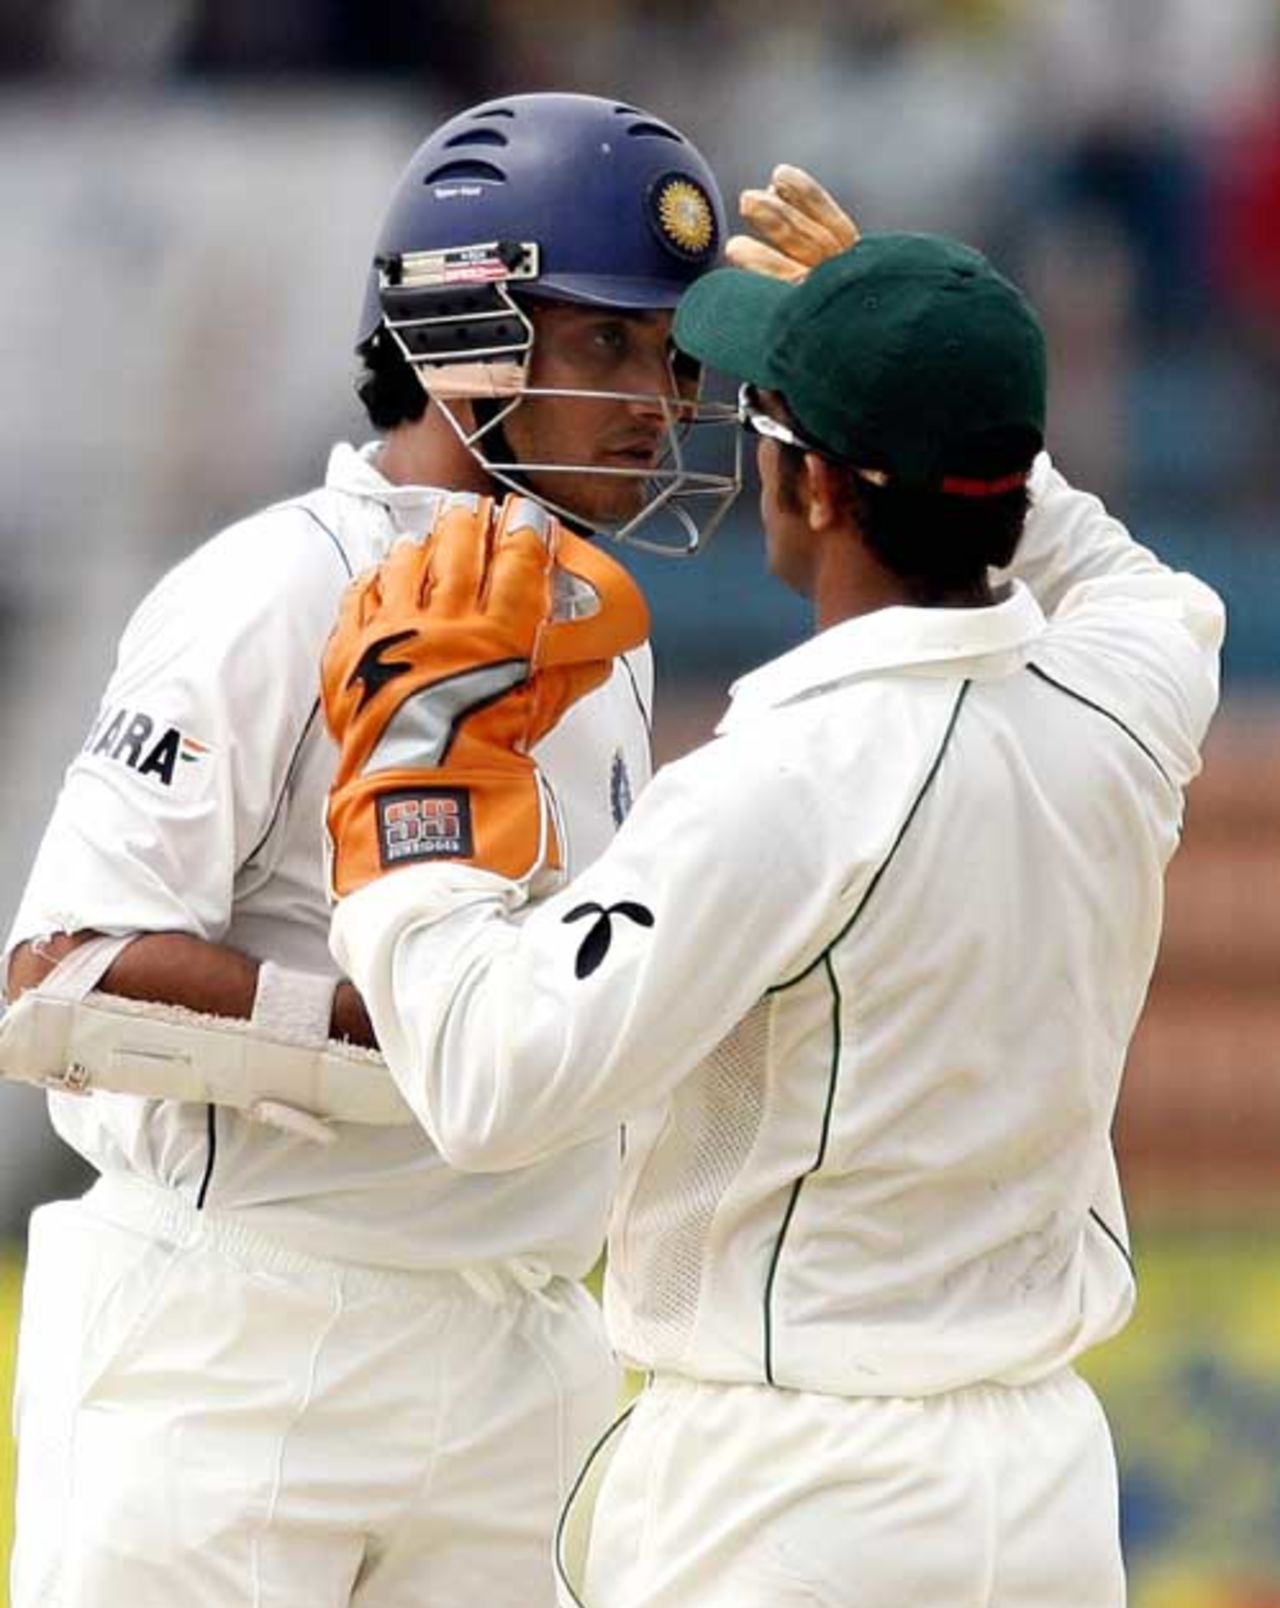 Khaled Masud helps Sourav Ganguly to remove dust from his eyes, Bangladesh v India, 1st Test, Chittagong, 5th day 